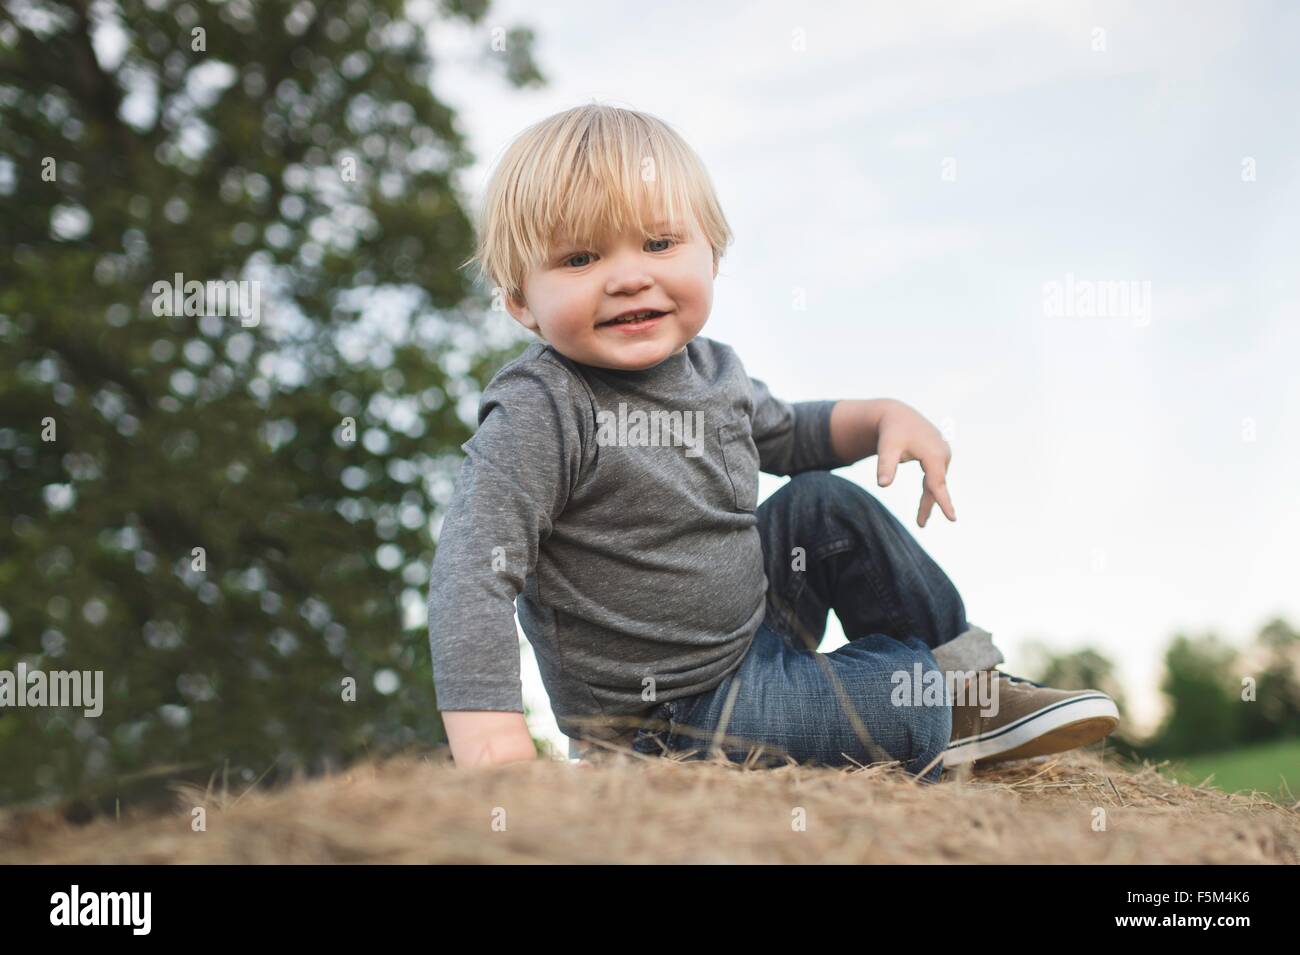 Portrait of young boy, outdoors Stock Photo